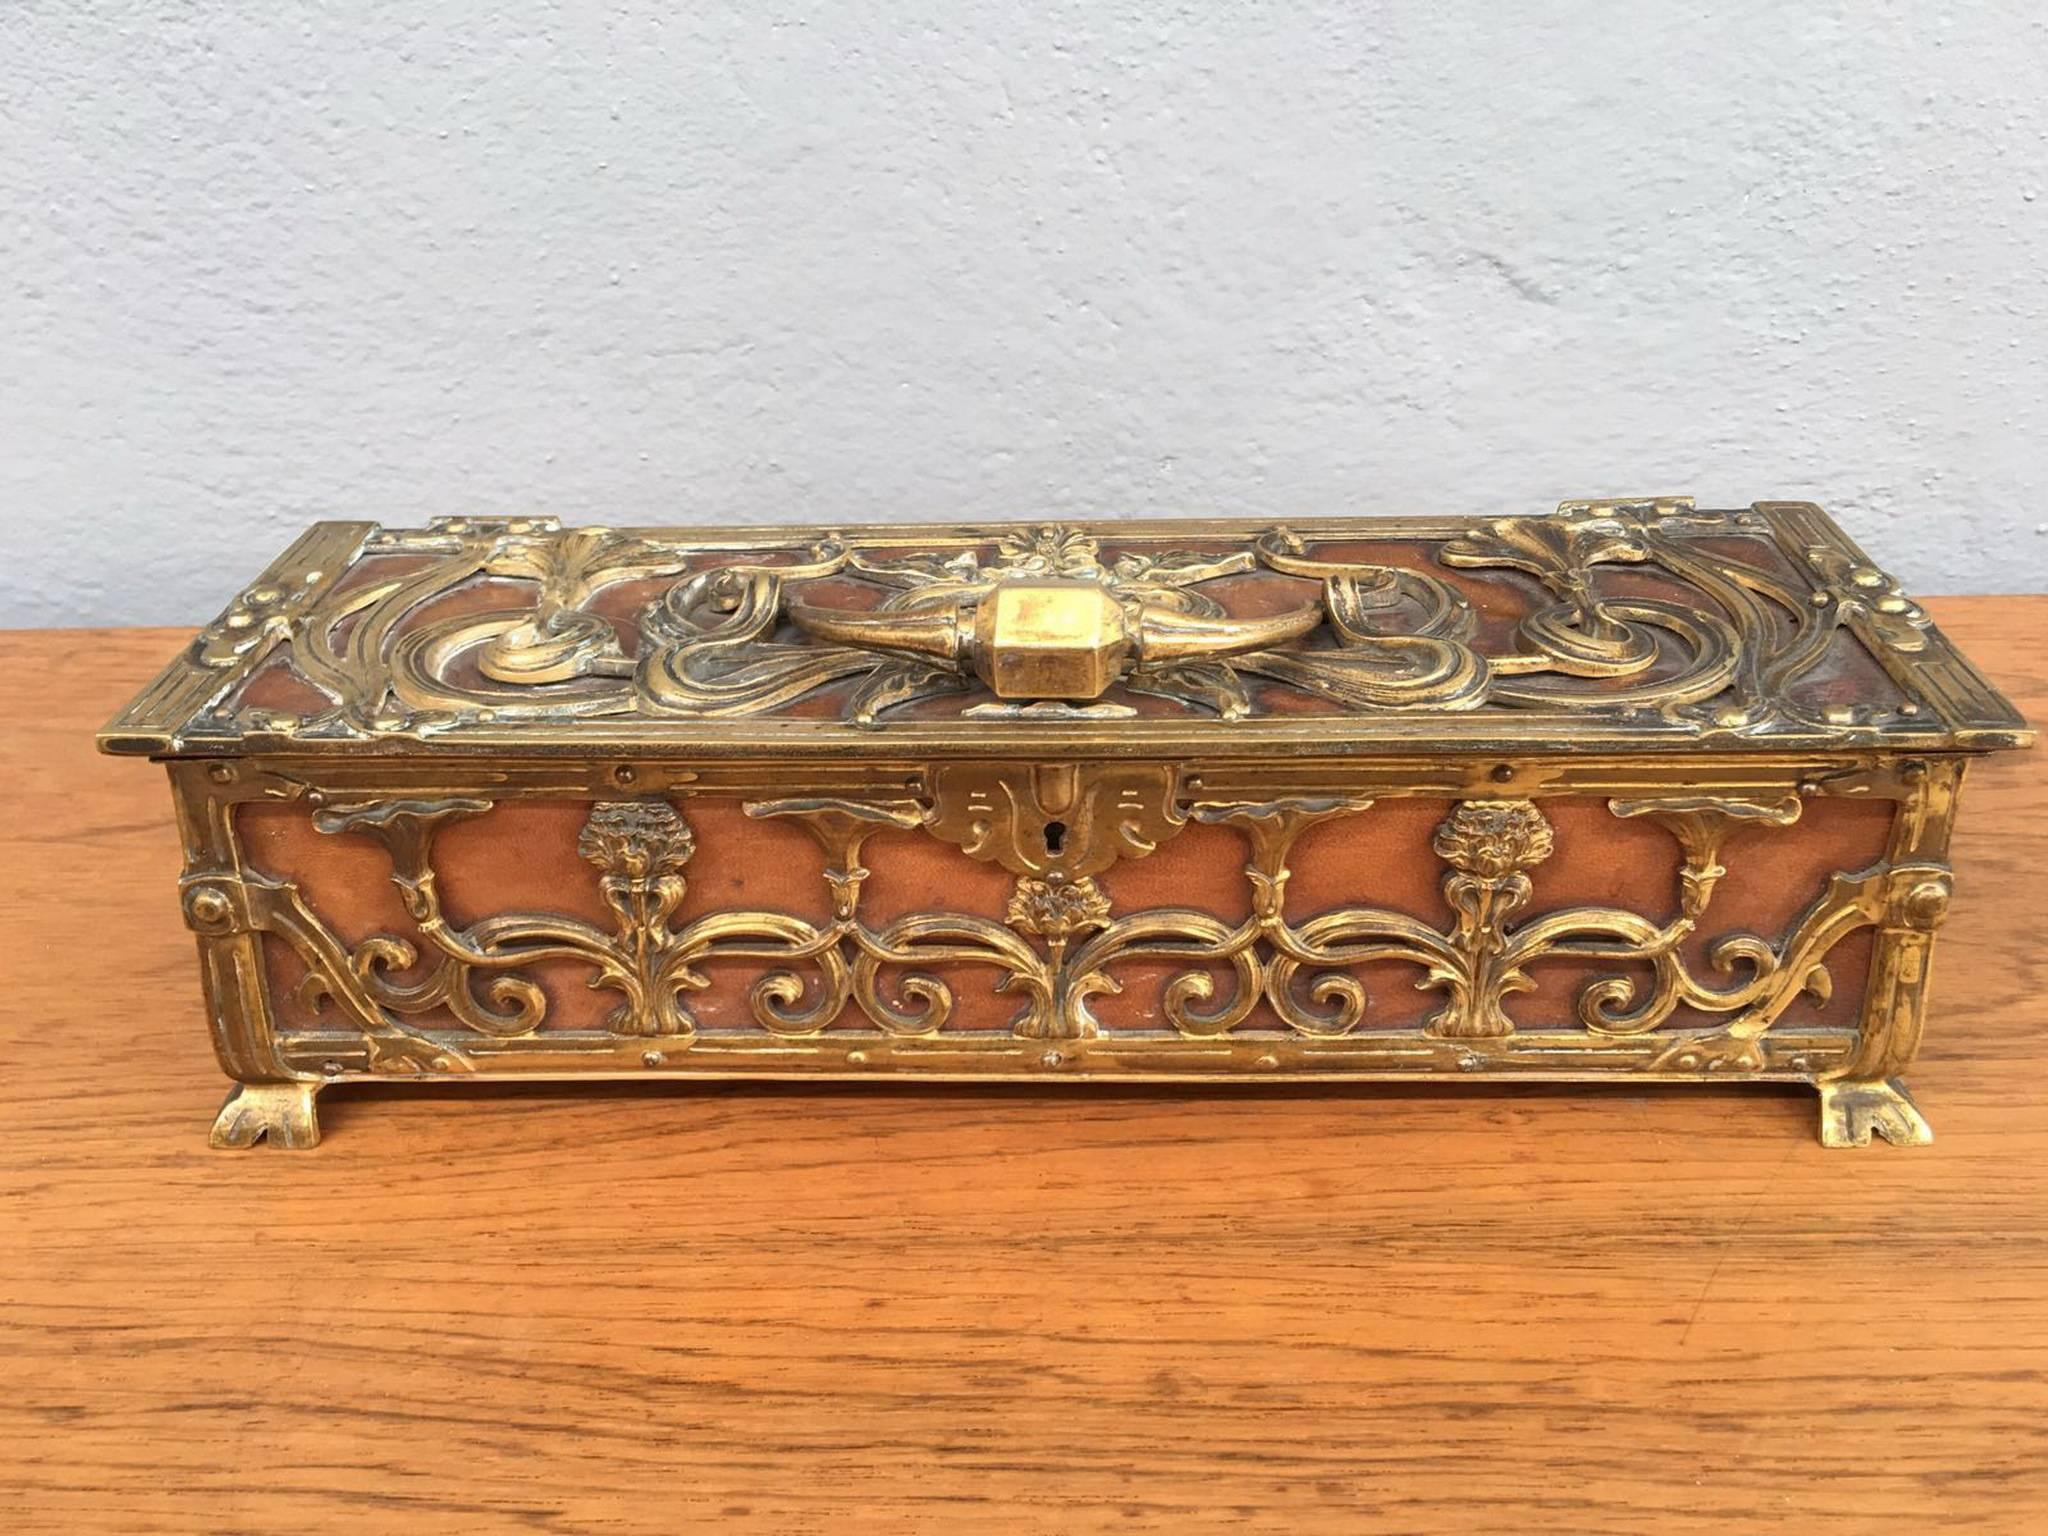 Precious jewelry box. Chiseled bronze and parchment.
Yellow velvet inside.